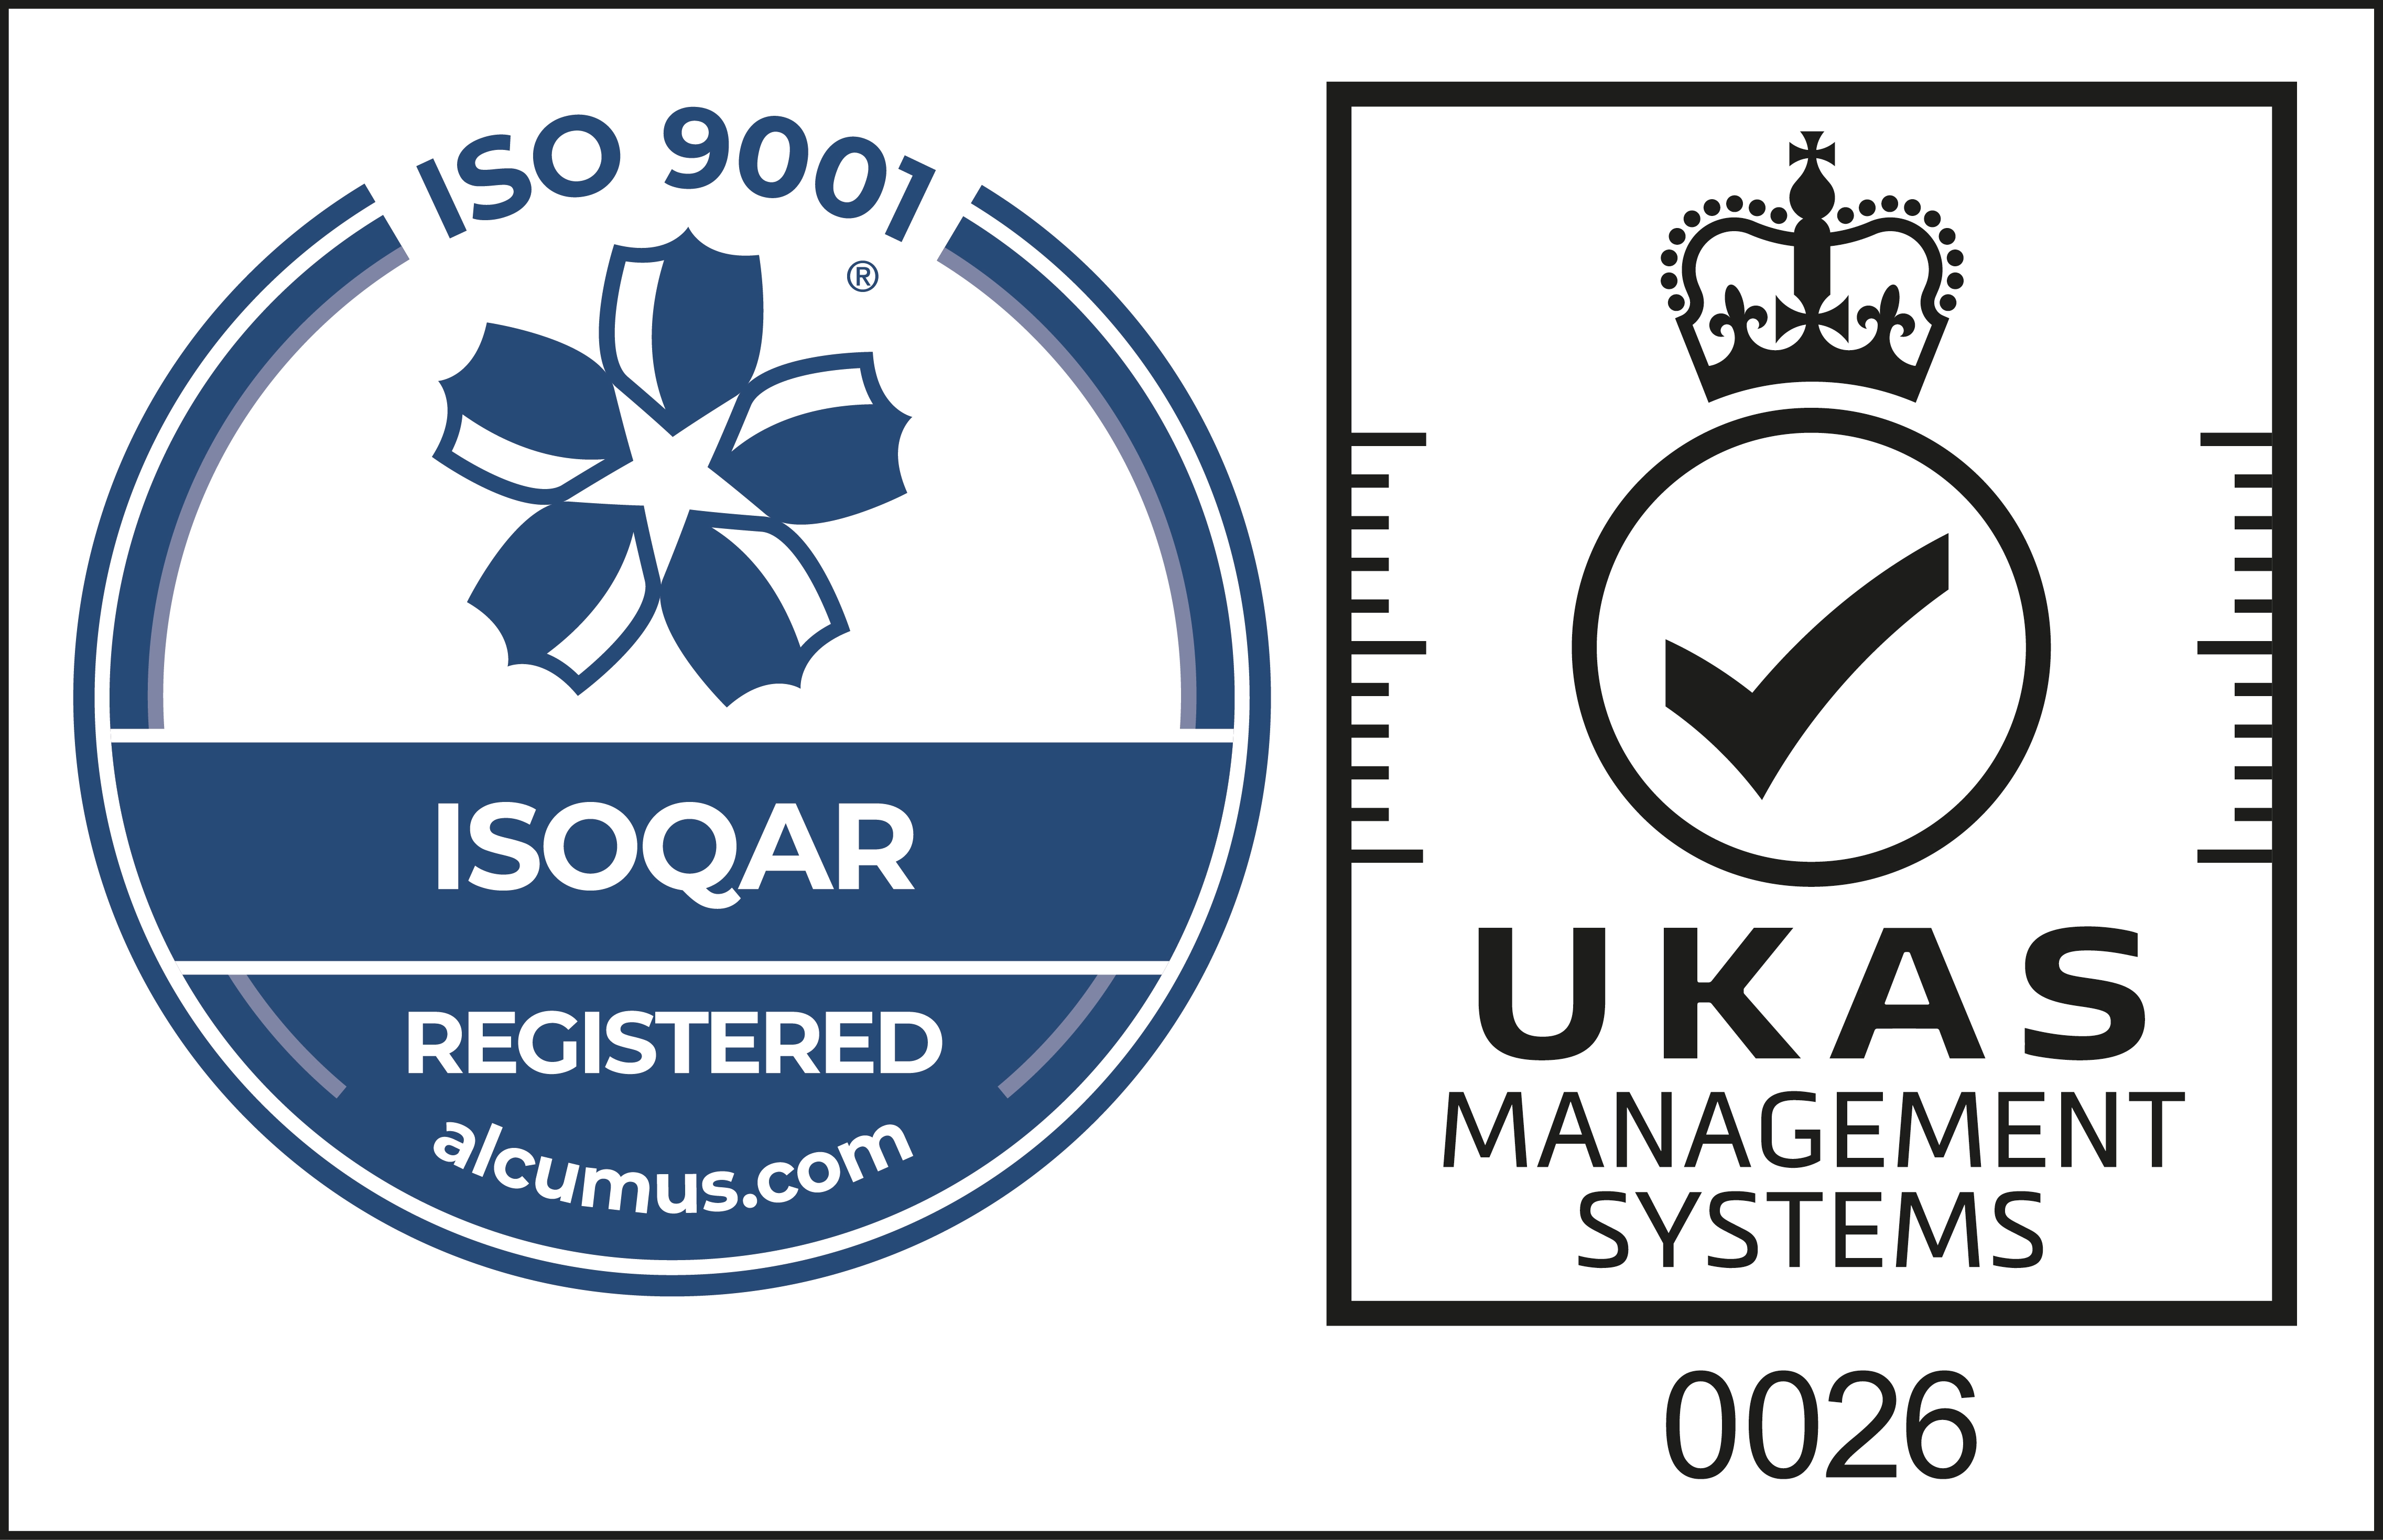 BSI Accredited to ISO9001:2015